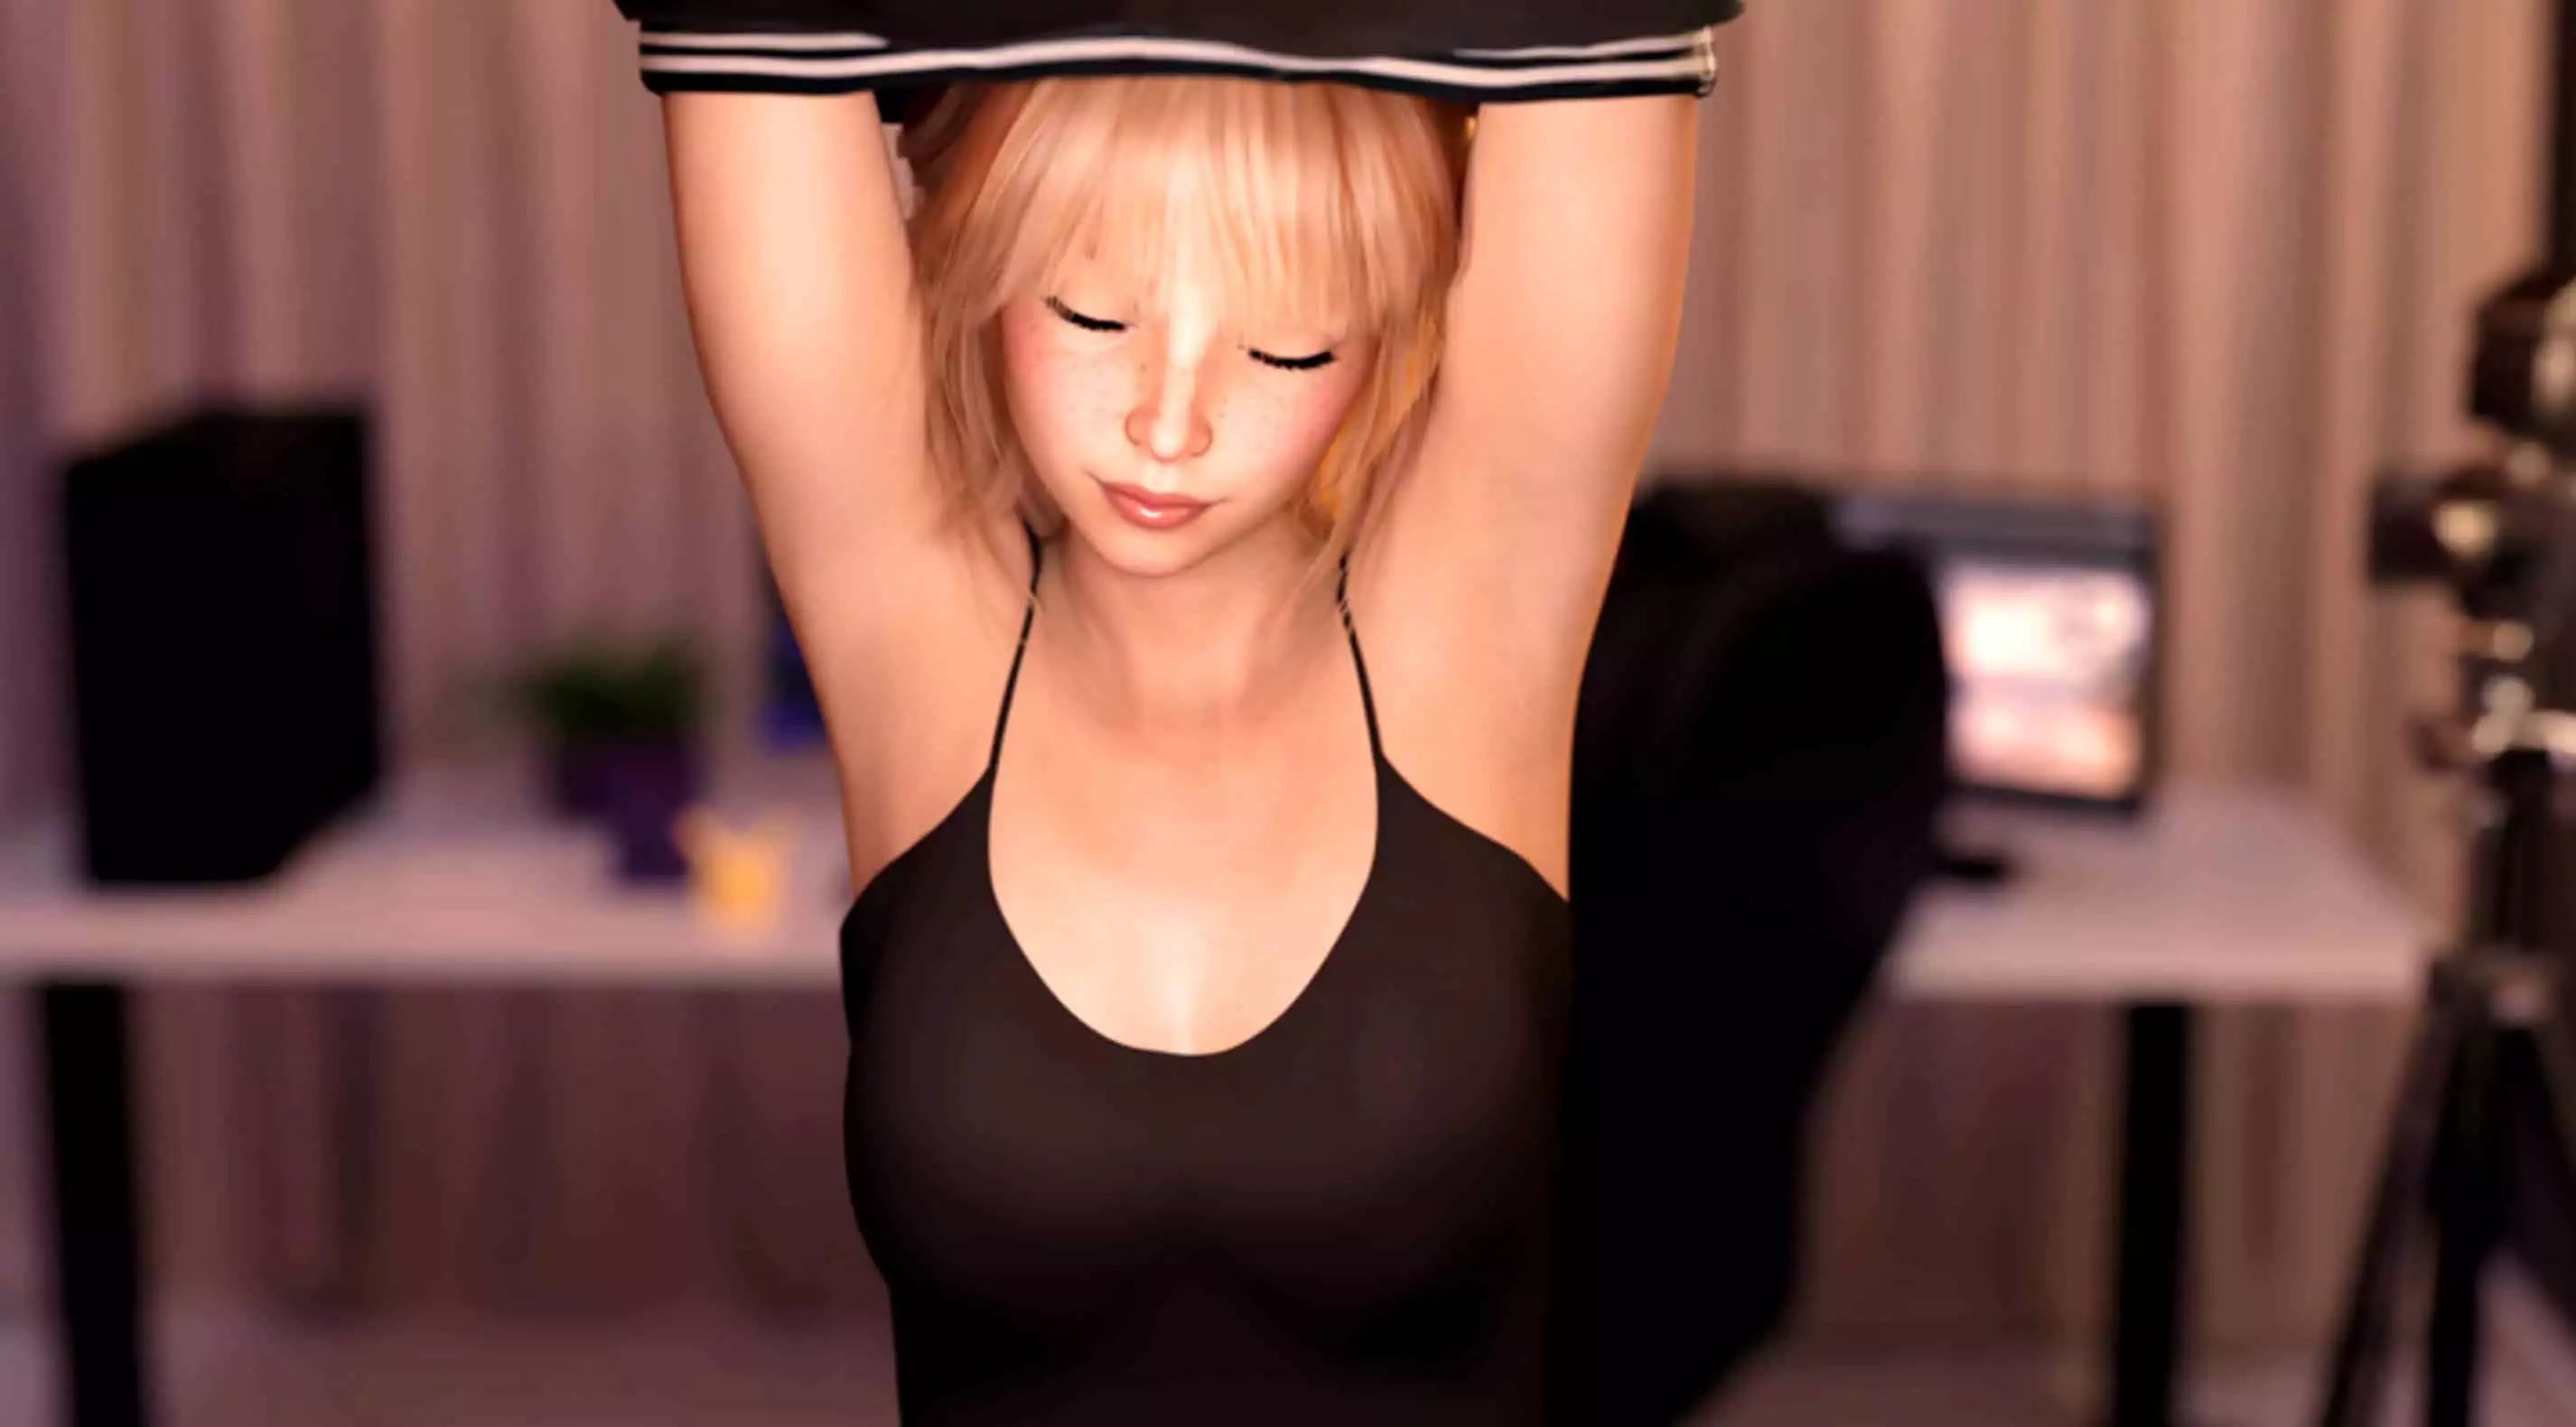 Best Android Sex Games #2